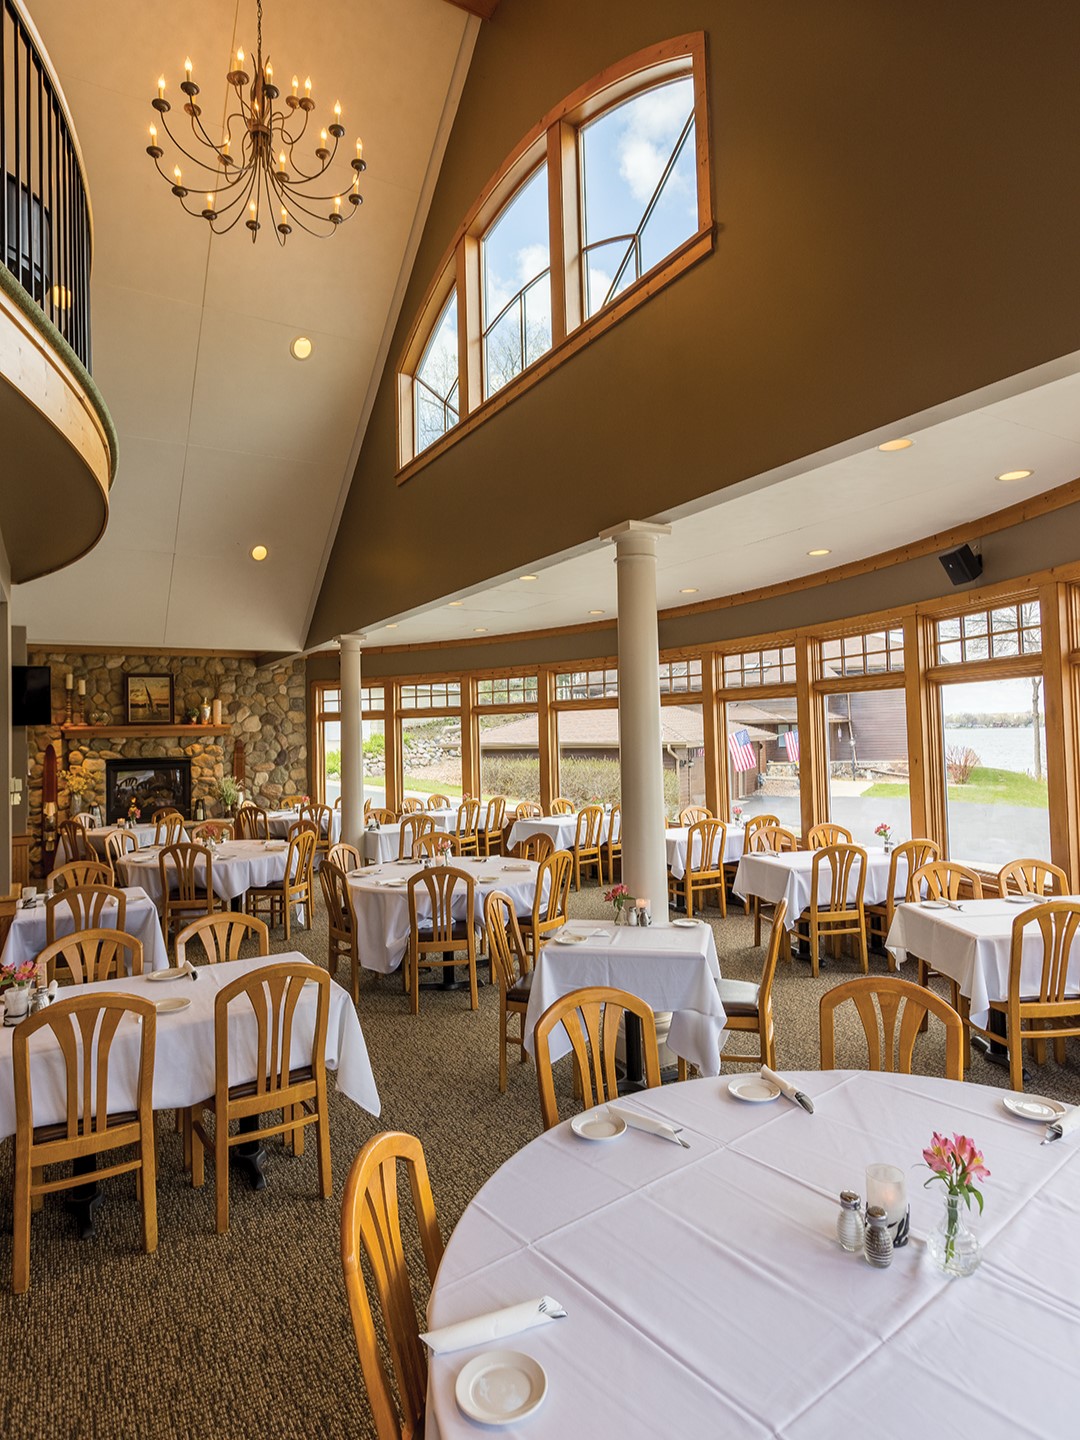 Al & Alma’s Supper Club serves up open views, allowing diners to soak up the lakelife atmosphere. 